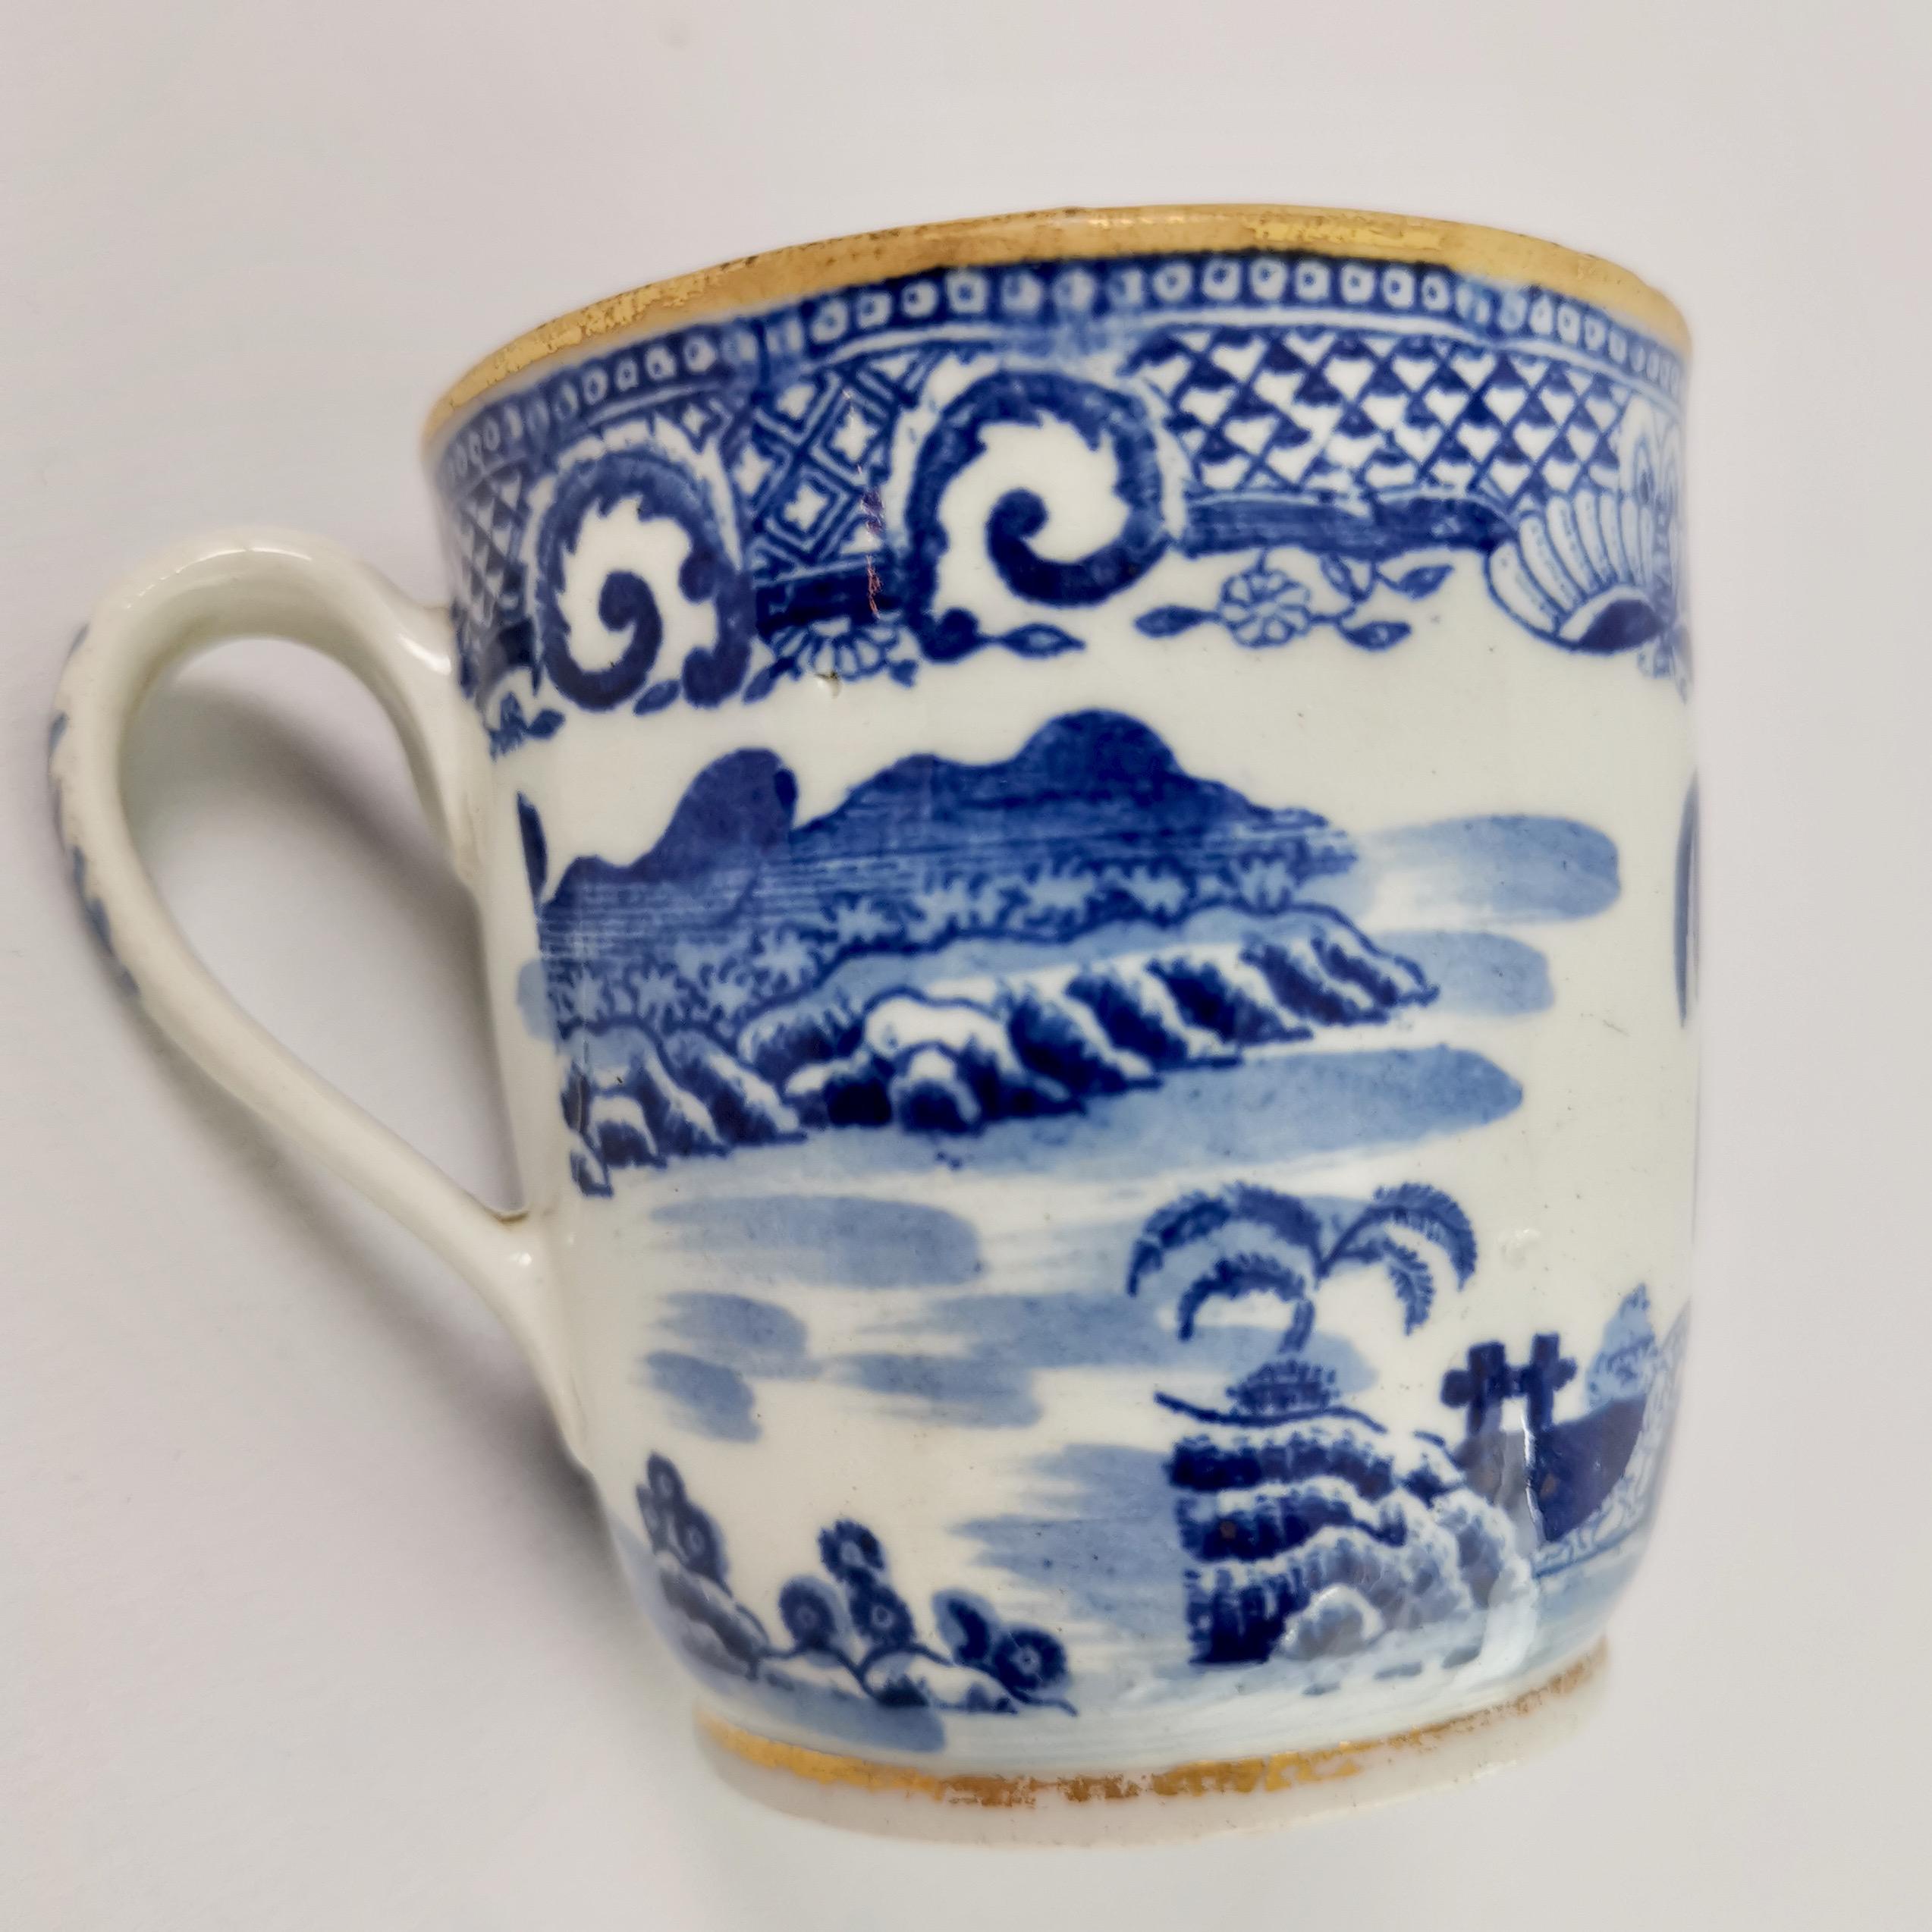 Orphaned Coffee Cup, New Hall, Blue and White Malay House, Georgian ca 1795 1